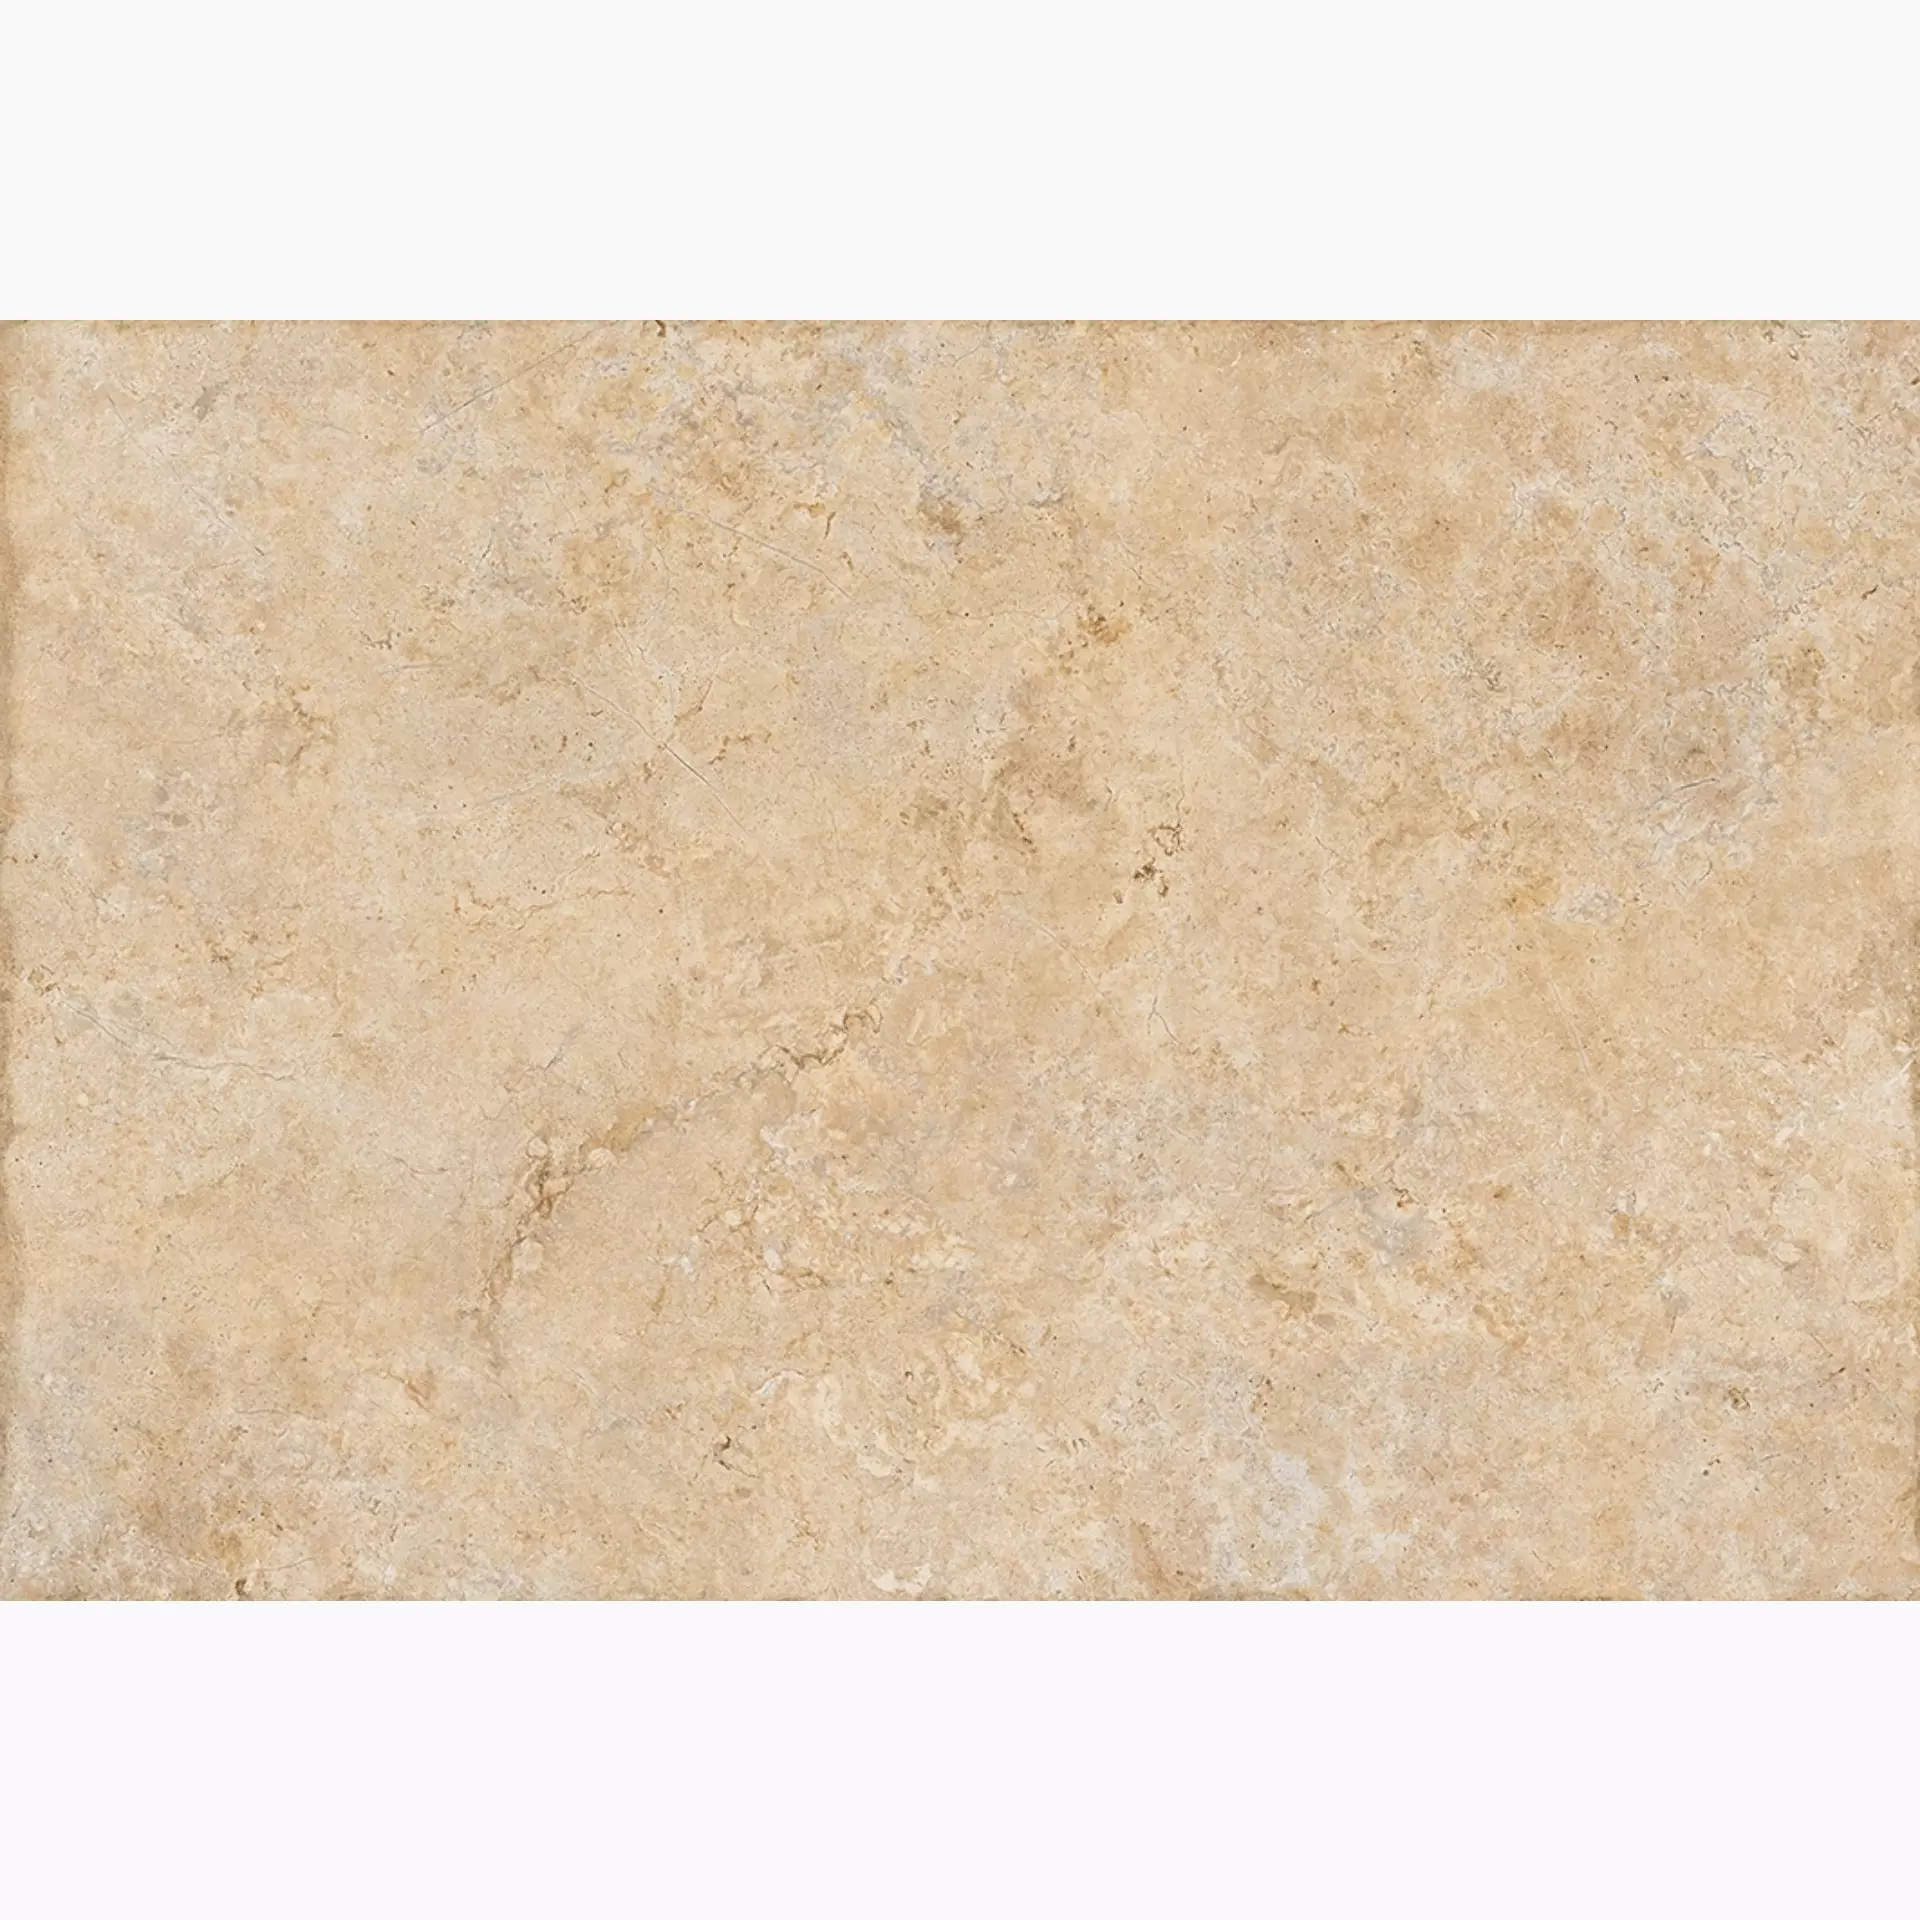 Sichenia Amboise Oro Smooth Chipped Edge 0192645 60x90cm rectified 10mm